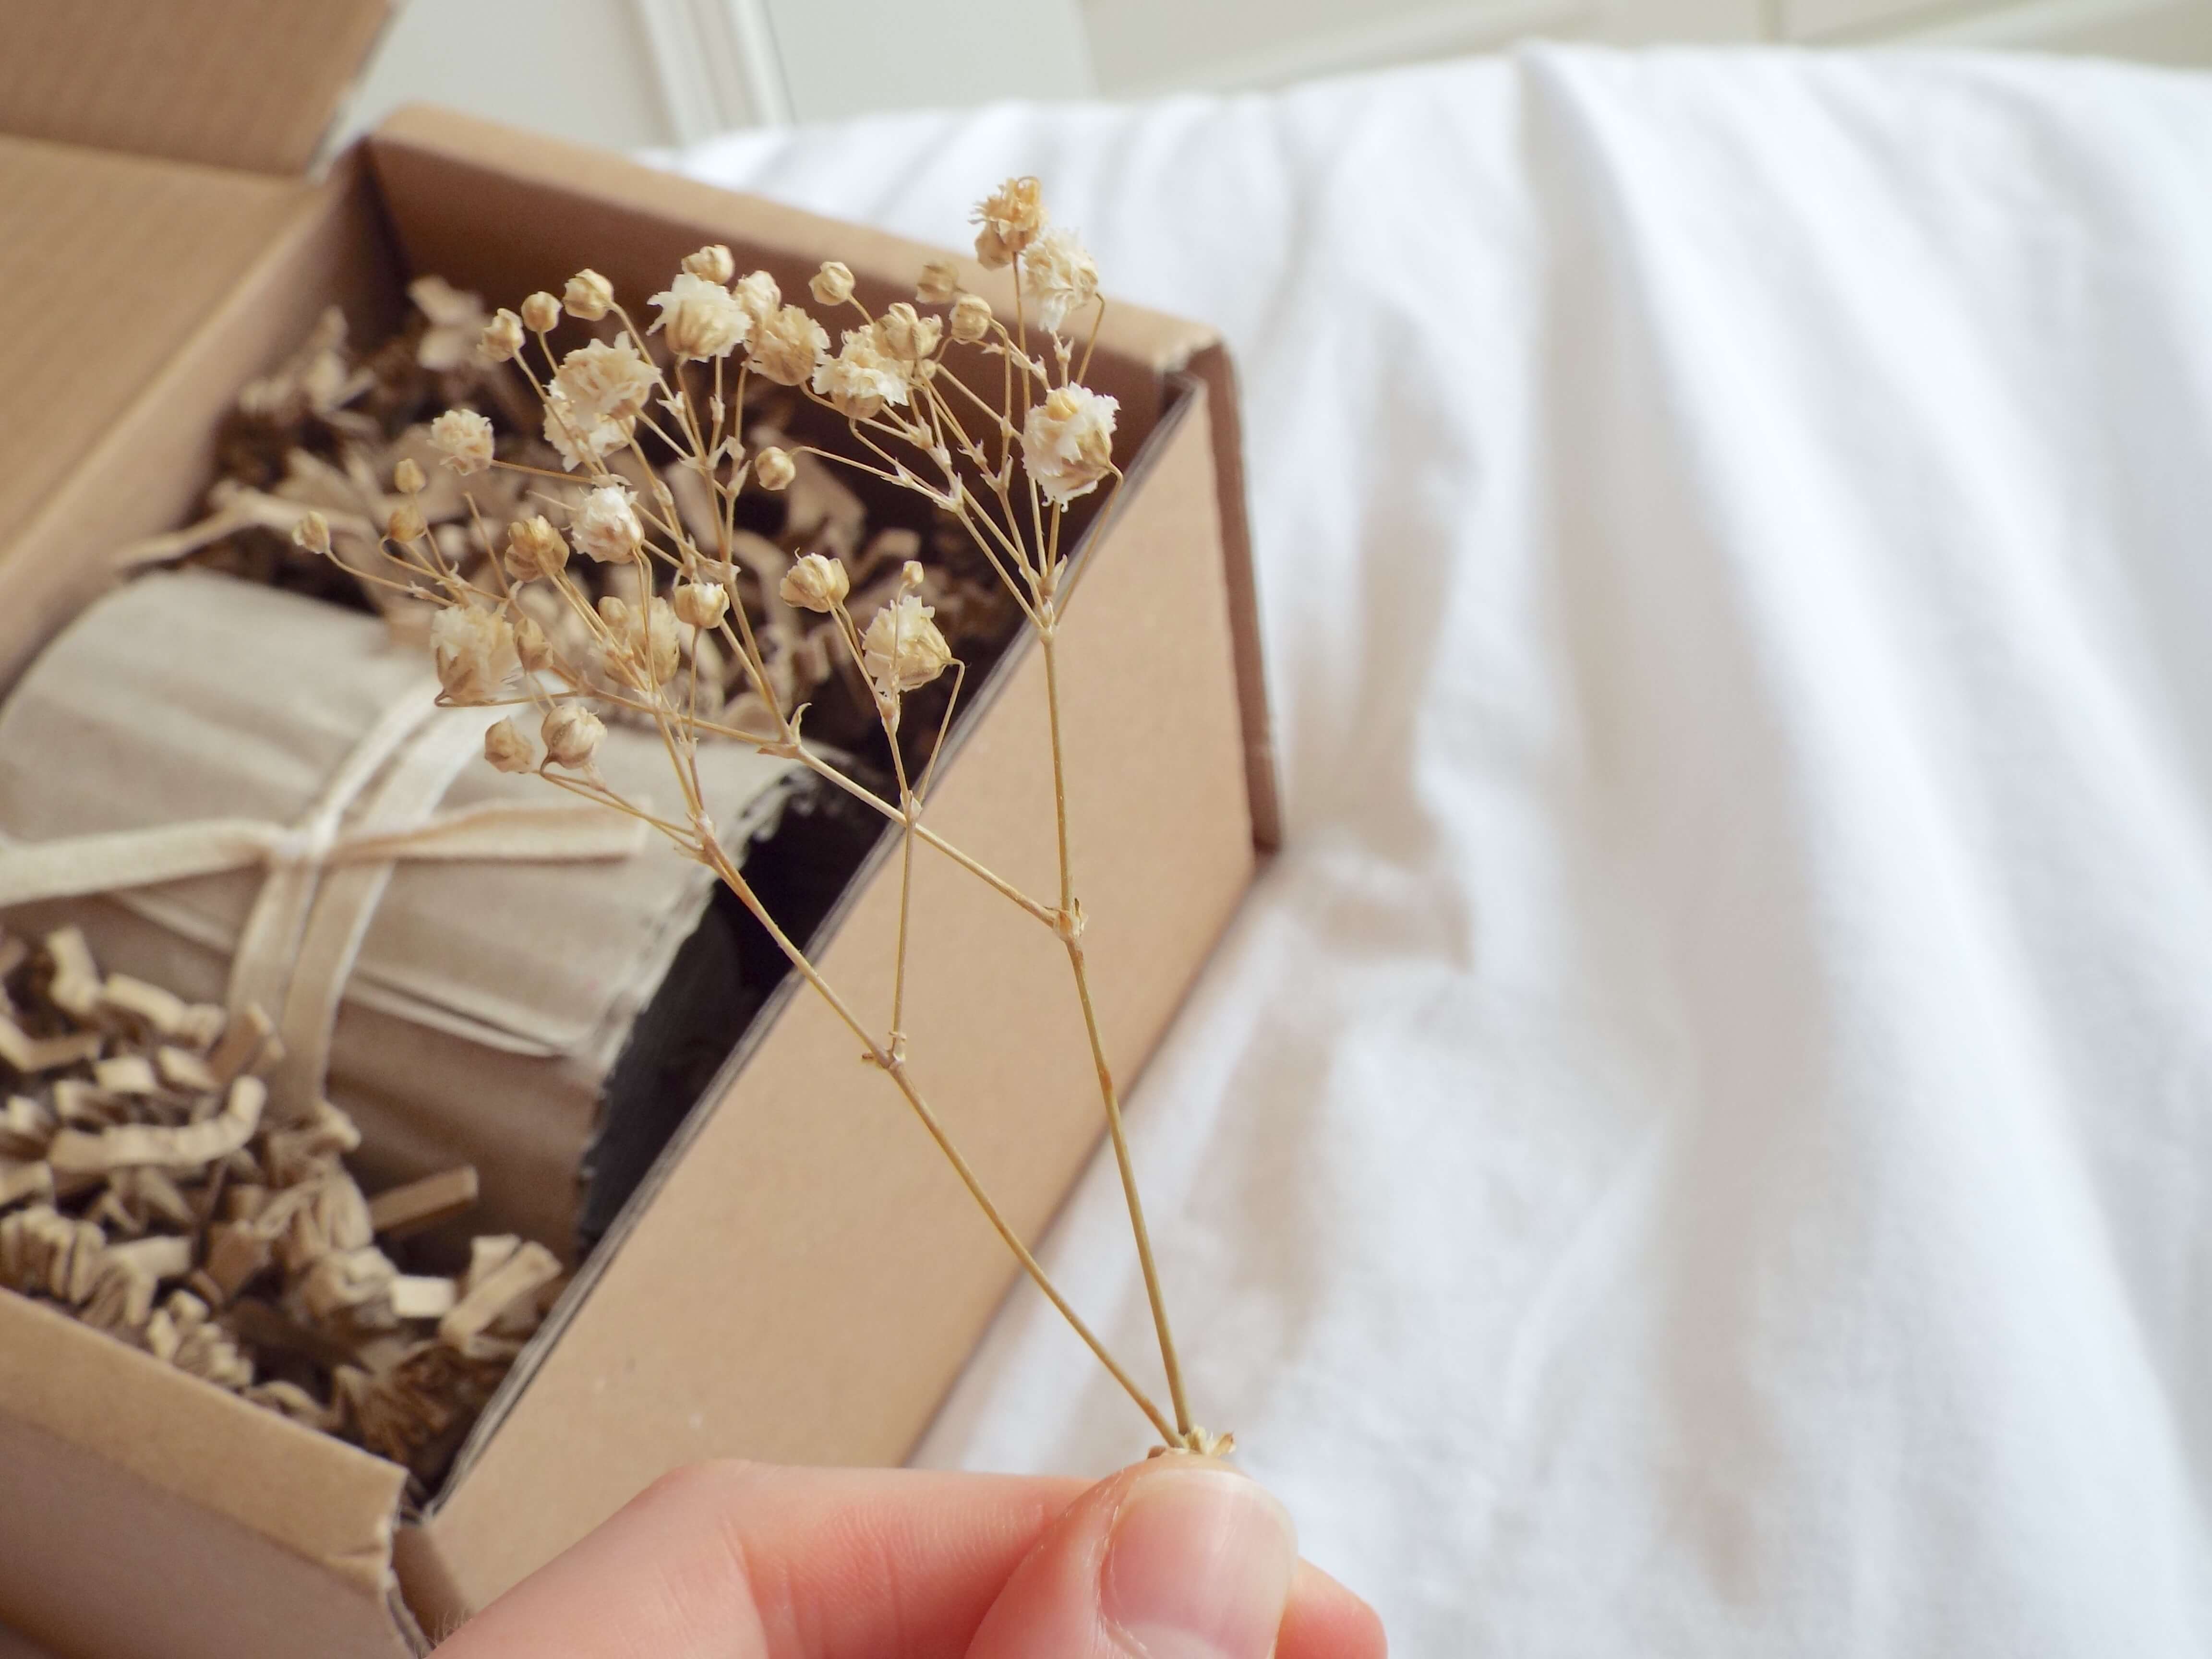 Holding the delicate beige dried flower above the box of the neatly nestled candle.